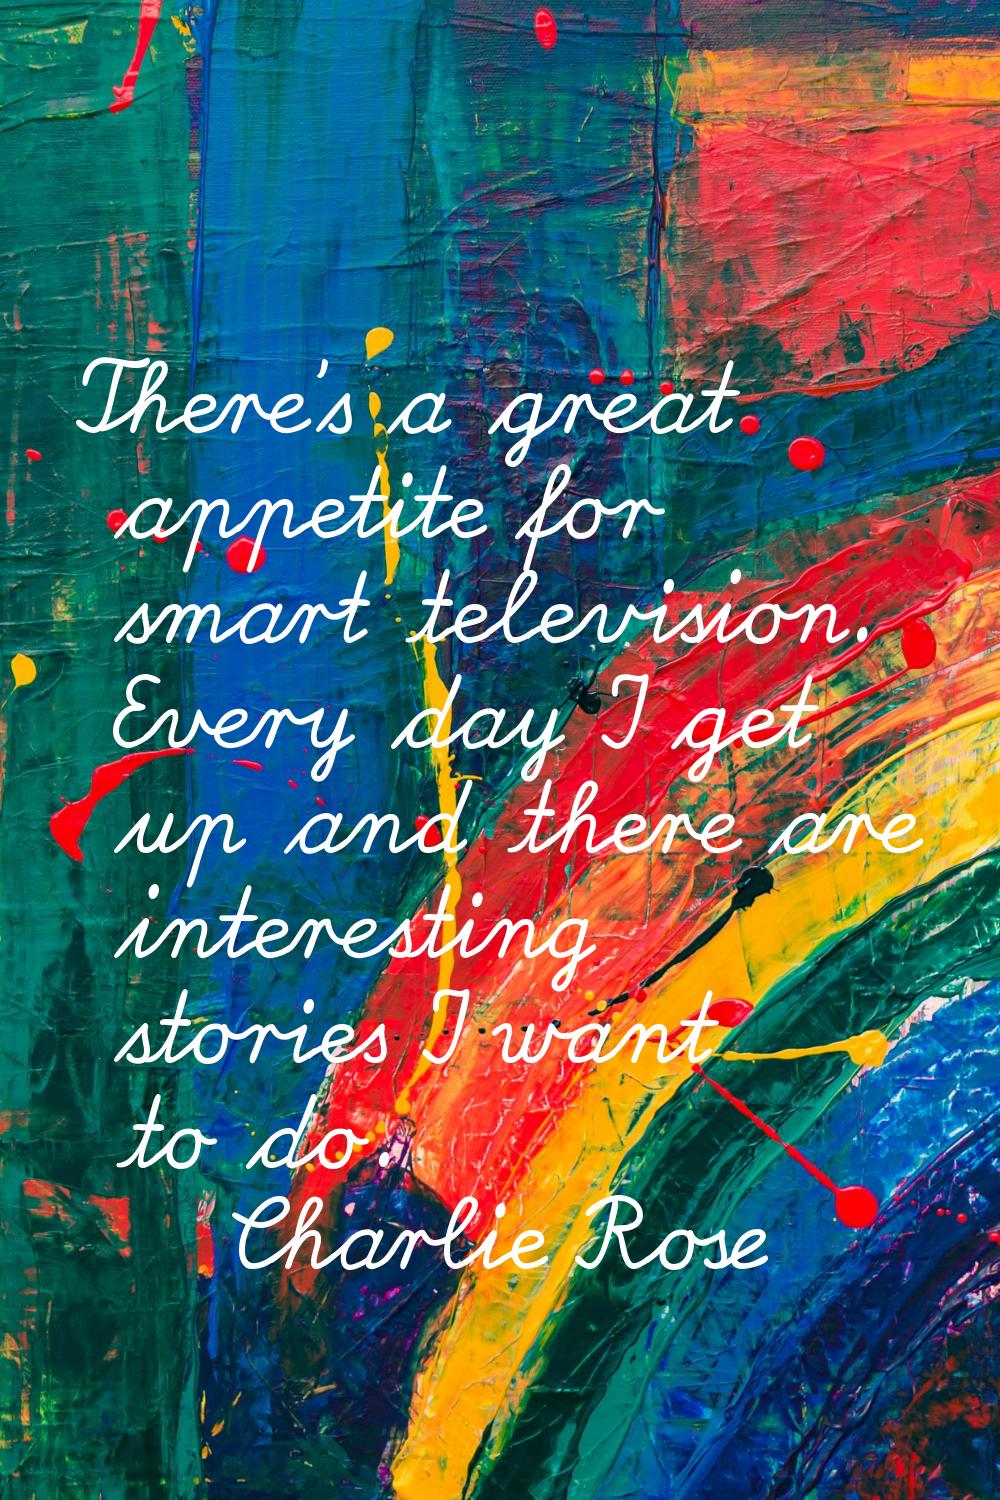 There's a great appetite for smart television. Every day I get up and there are interesting stories